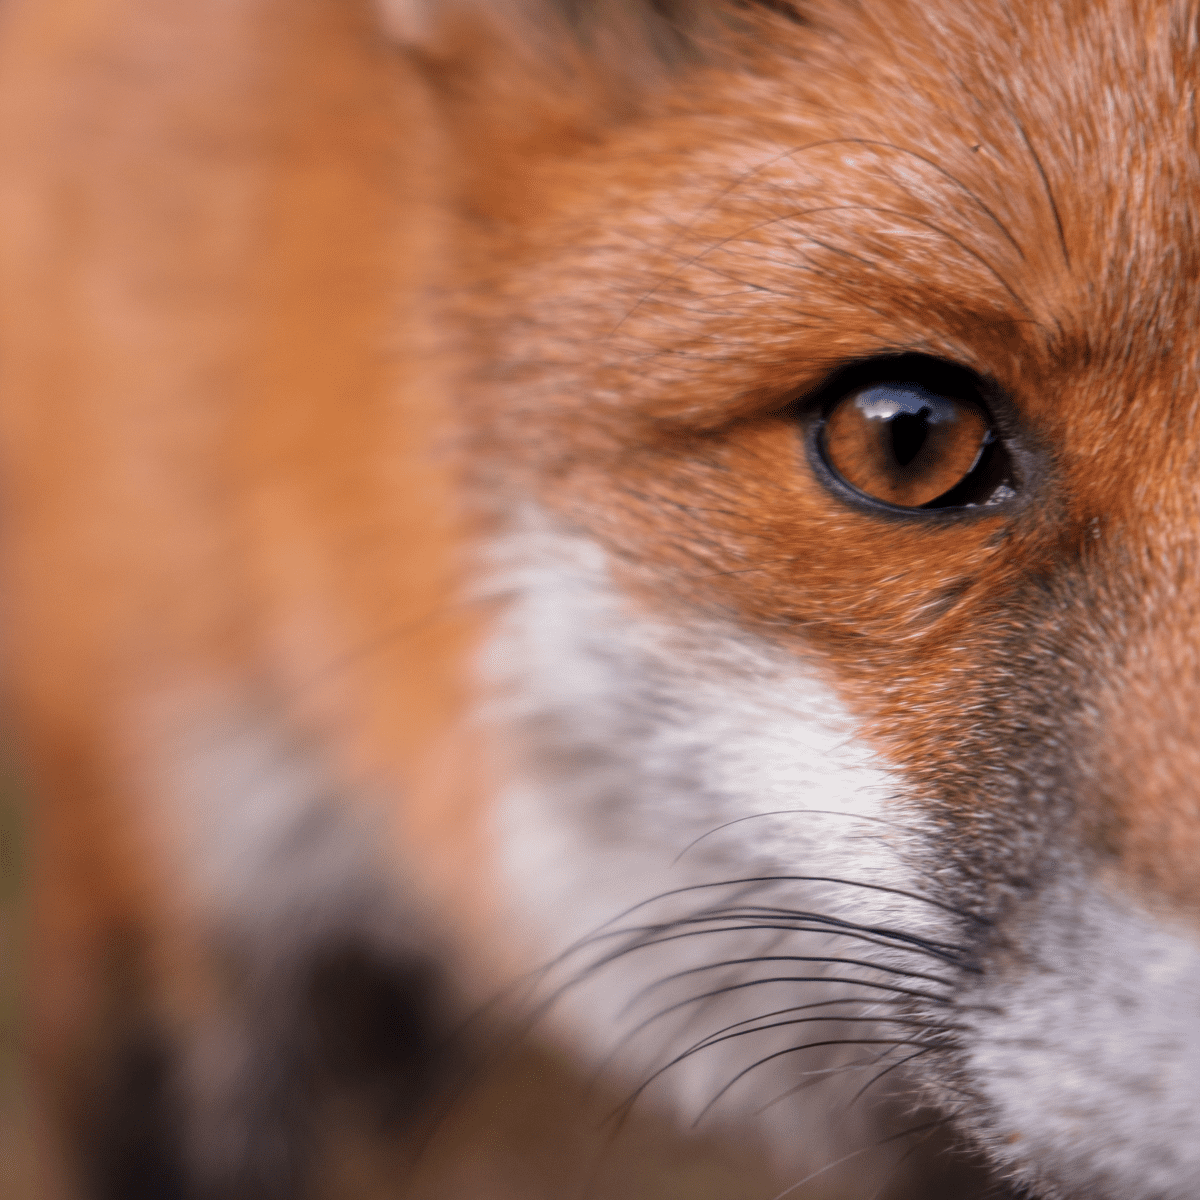 Human-Driven Speciation: Did We Cause the Red Fox to Evolve Itself